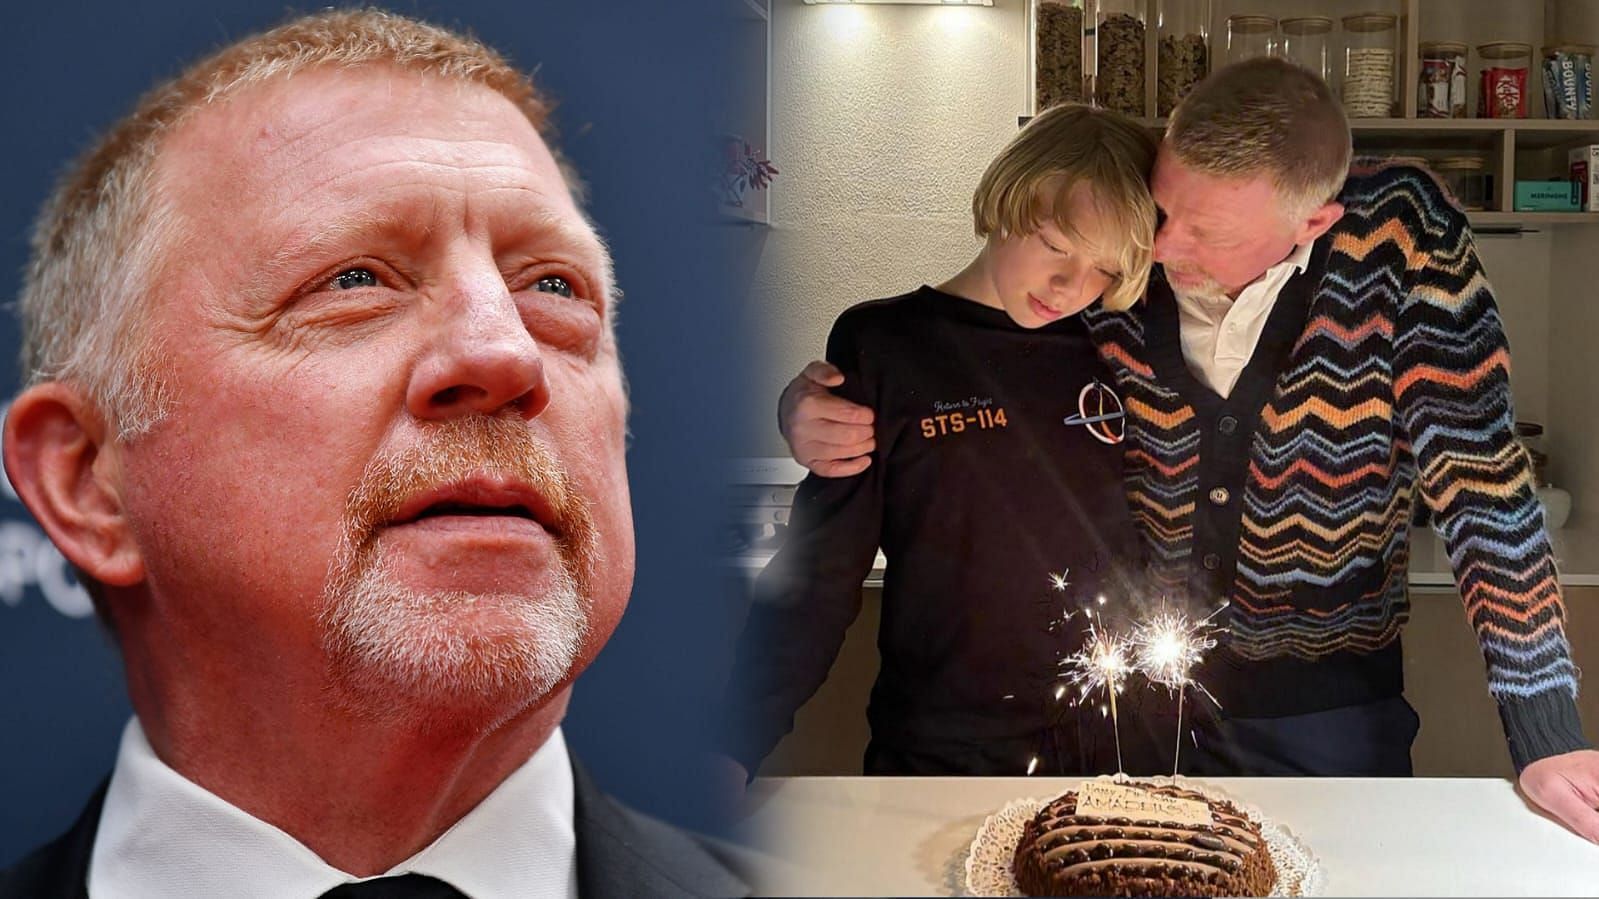 In Pictures: Boris Becker celebrates his son Amadeus' 14th birthday in Italy ft. Museum visit, indoor skydiving